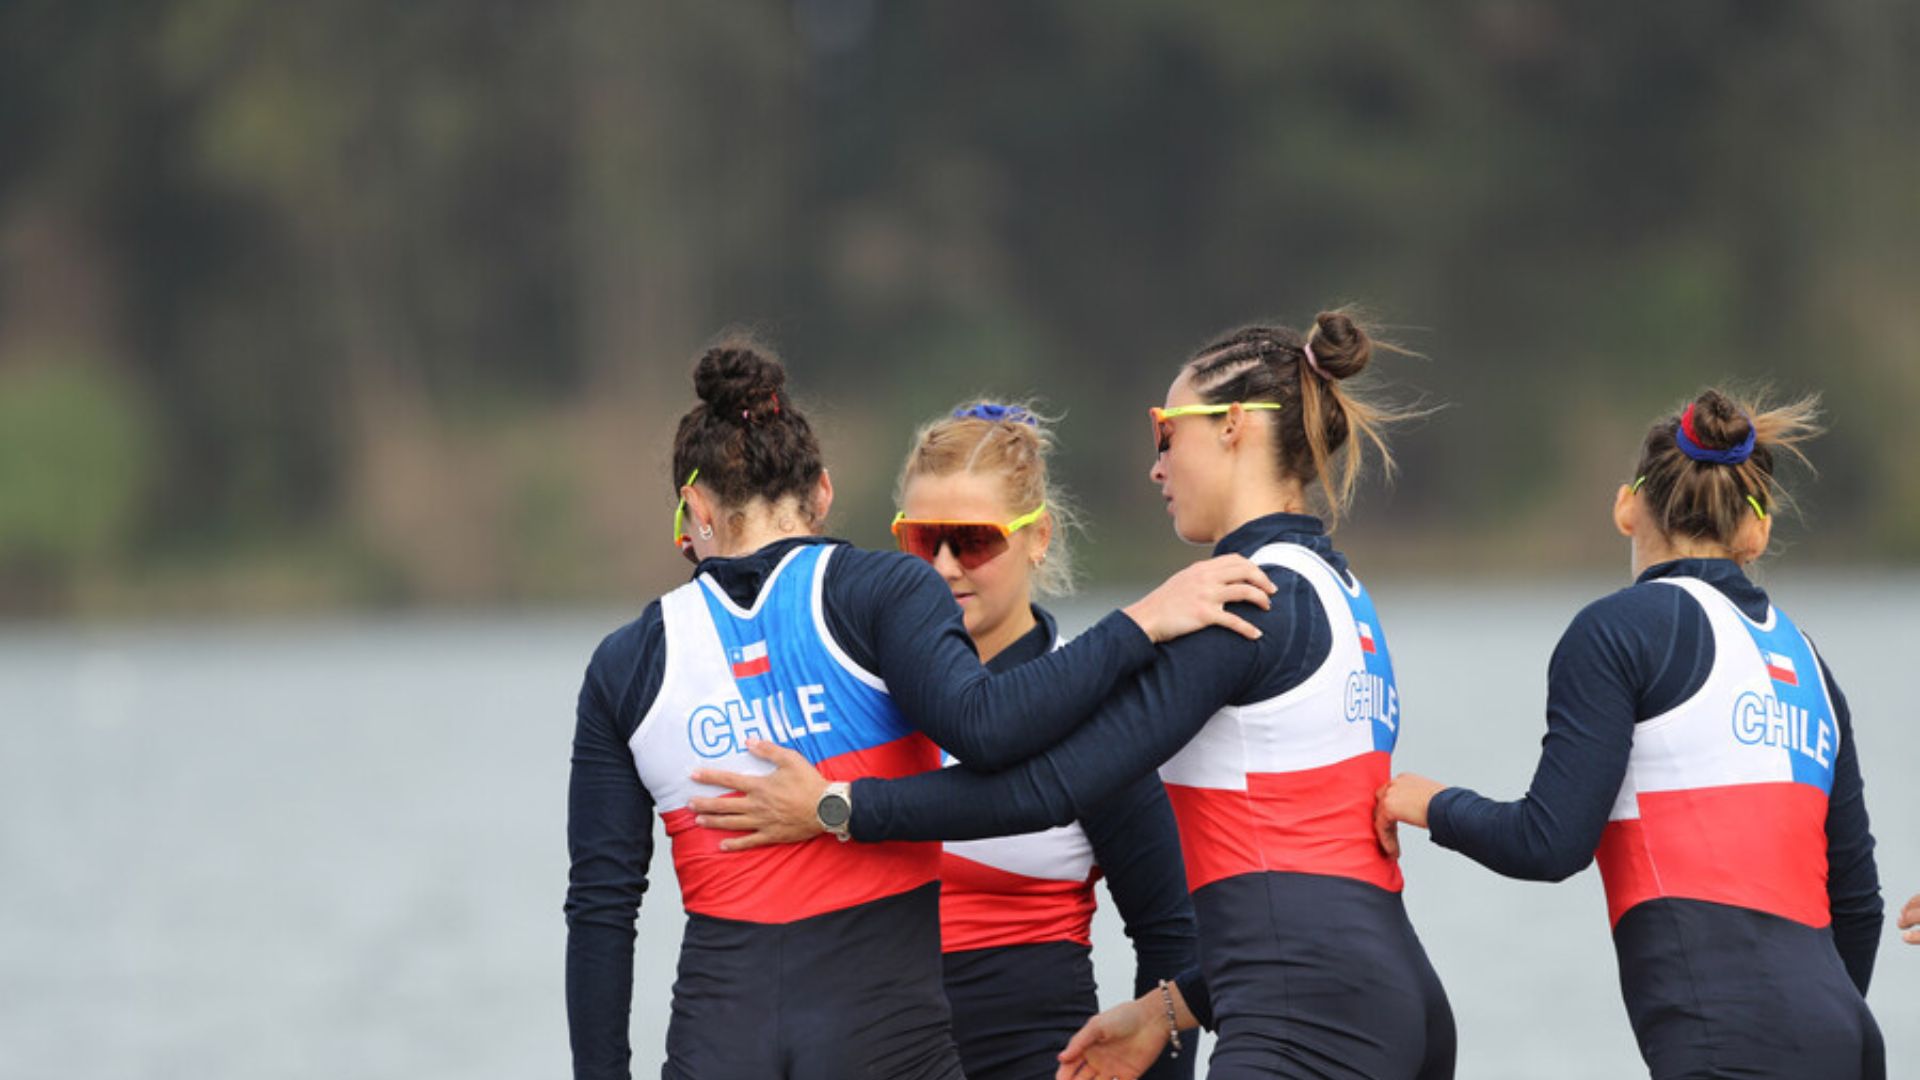 Rowing brought two new silver medals to Chile with close races in San Pedro